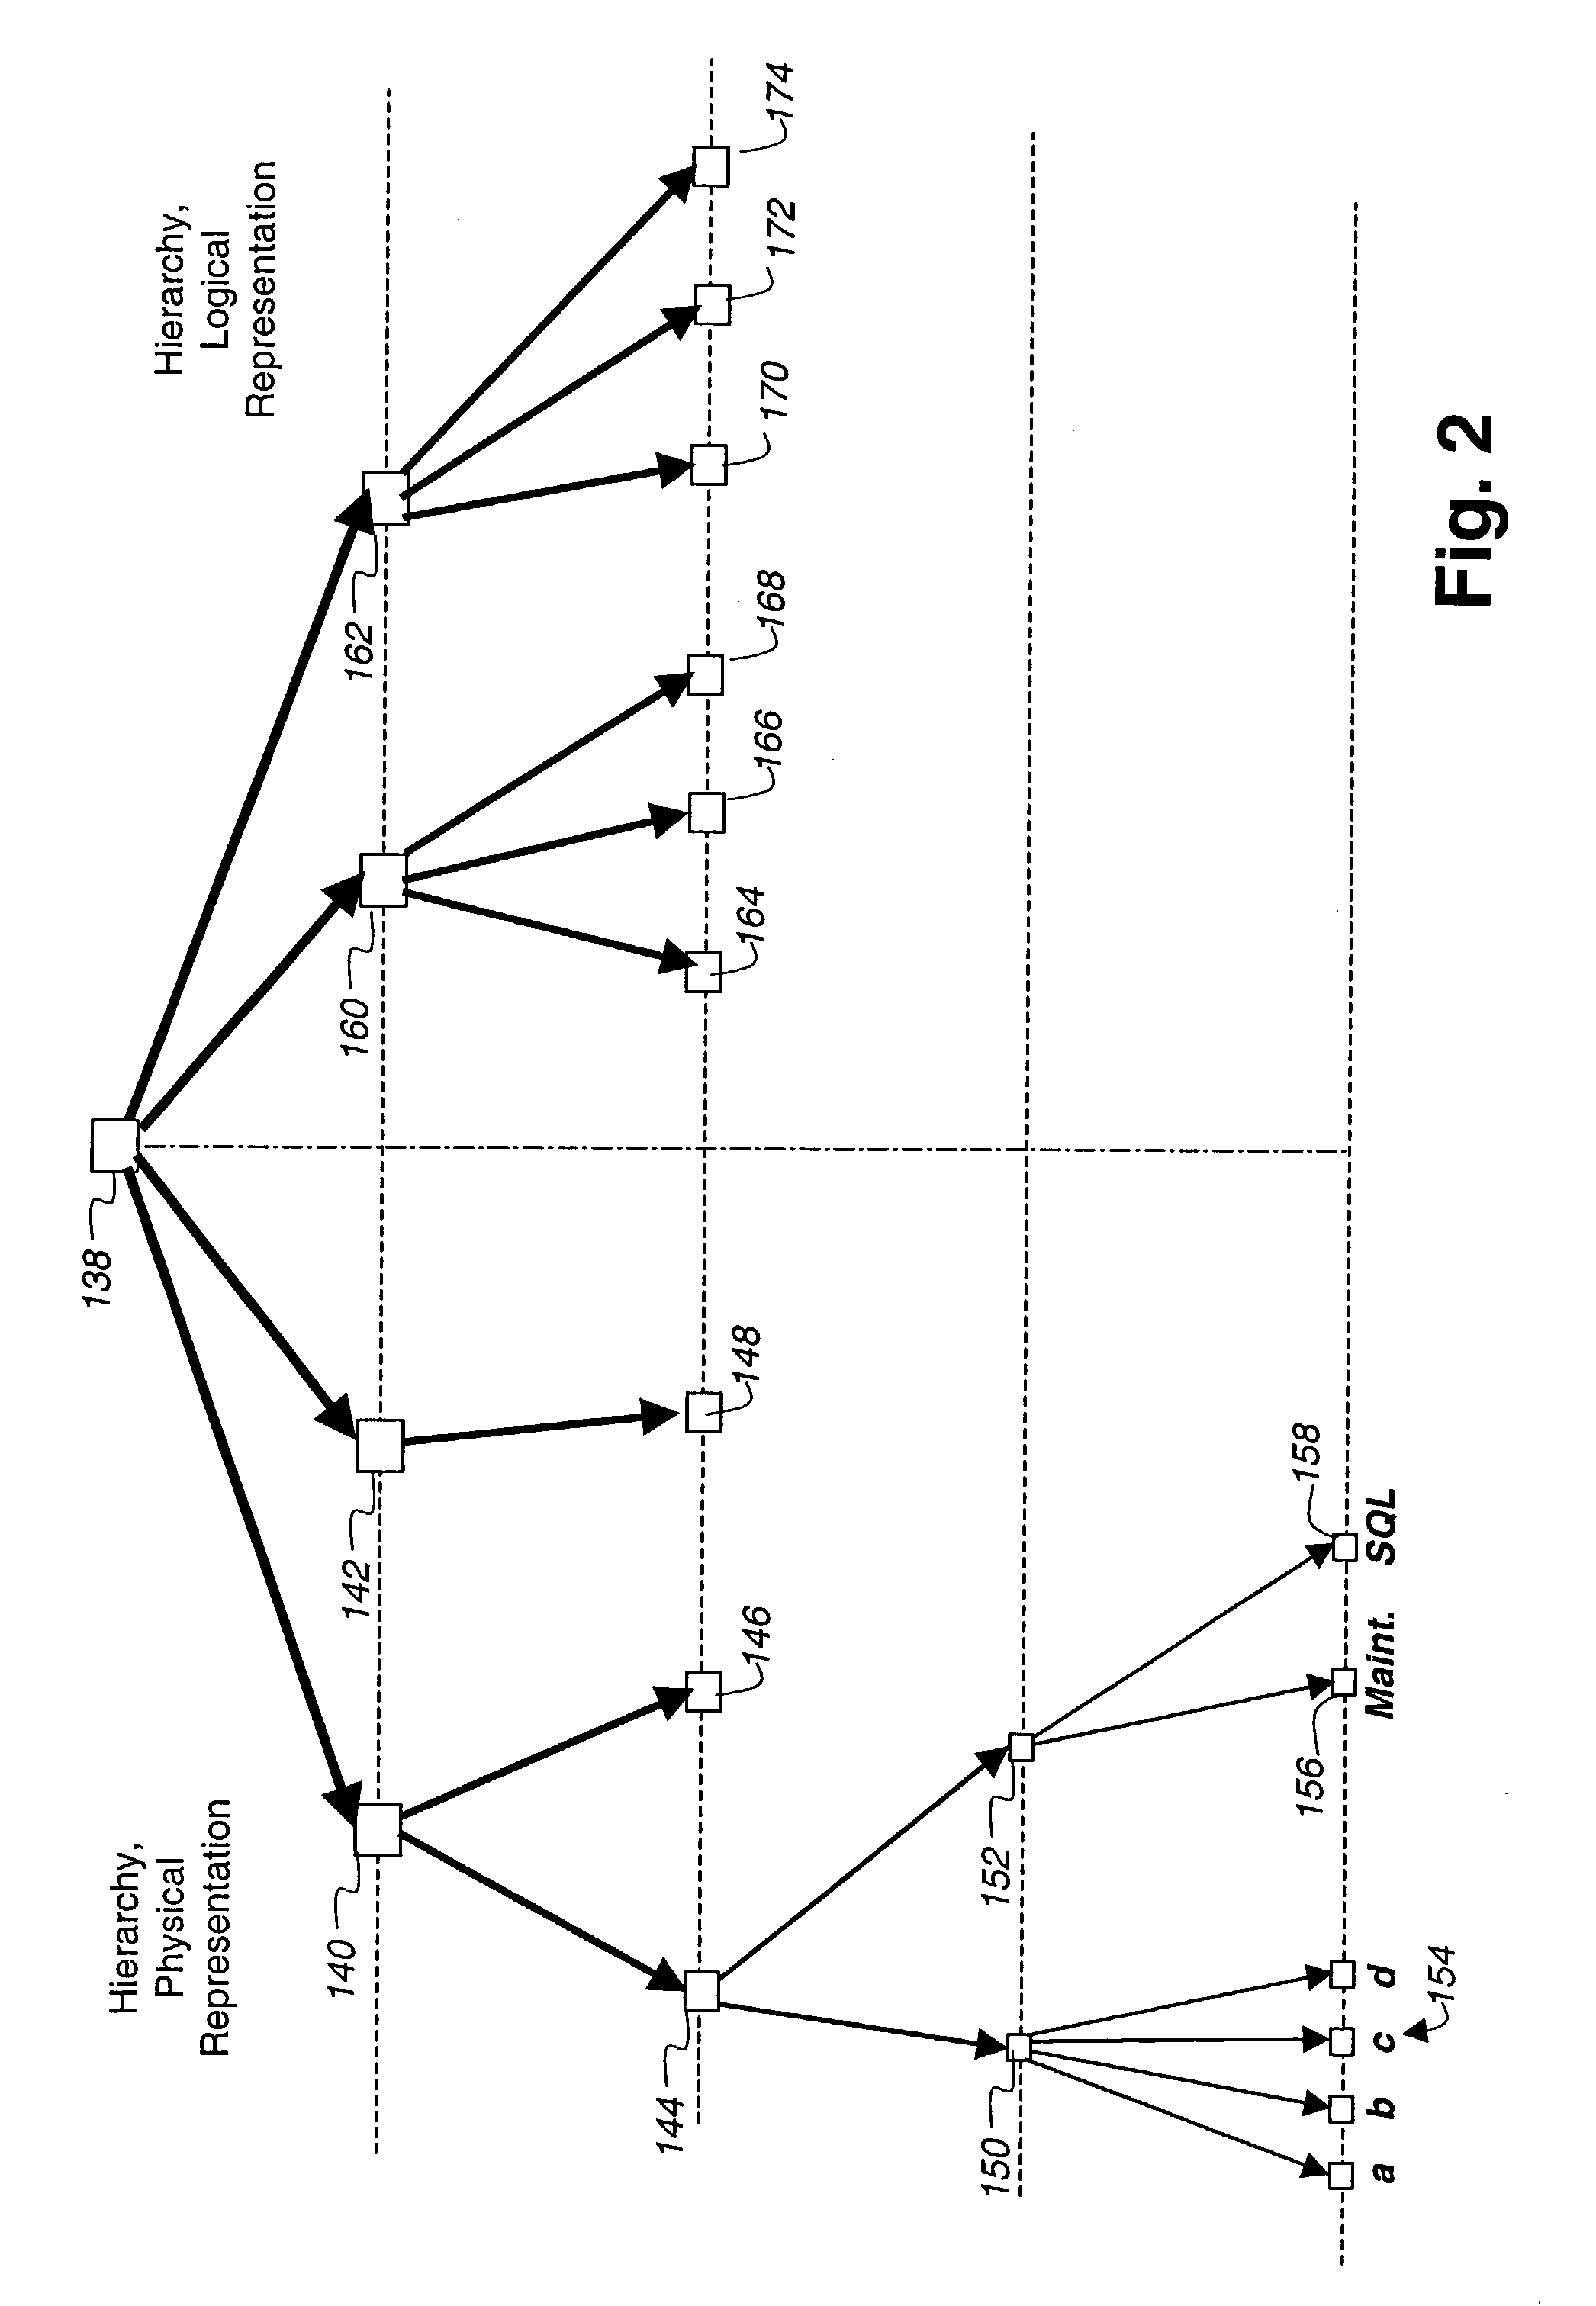 Method and apparatus for correlating network activity through visualizing network data